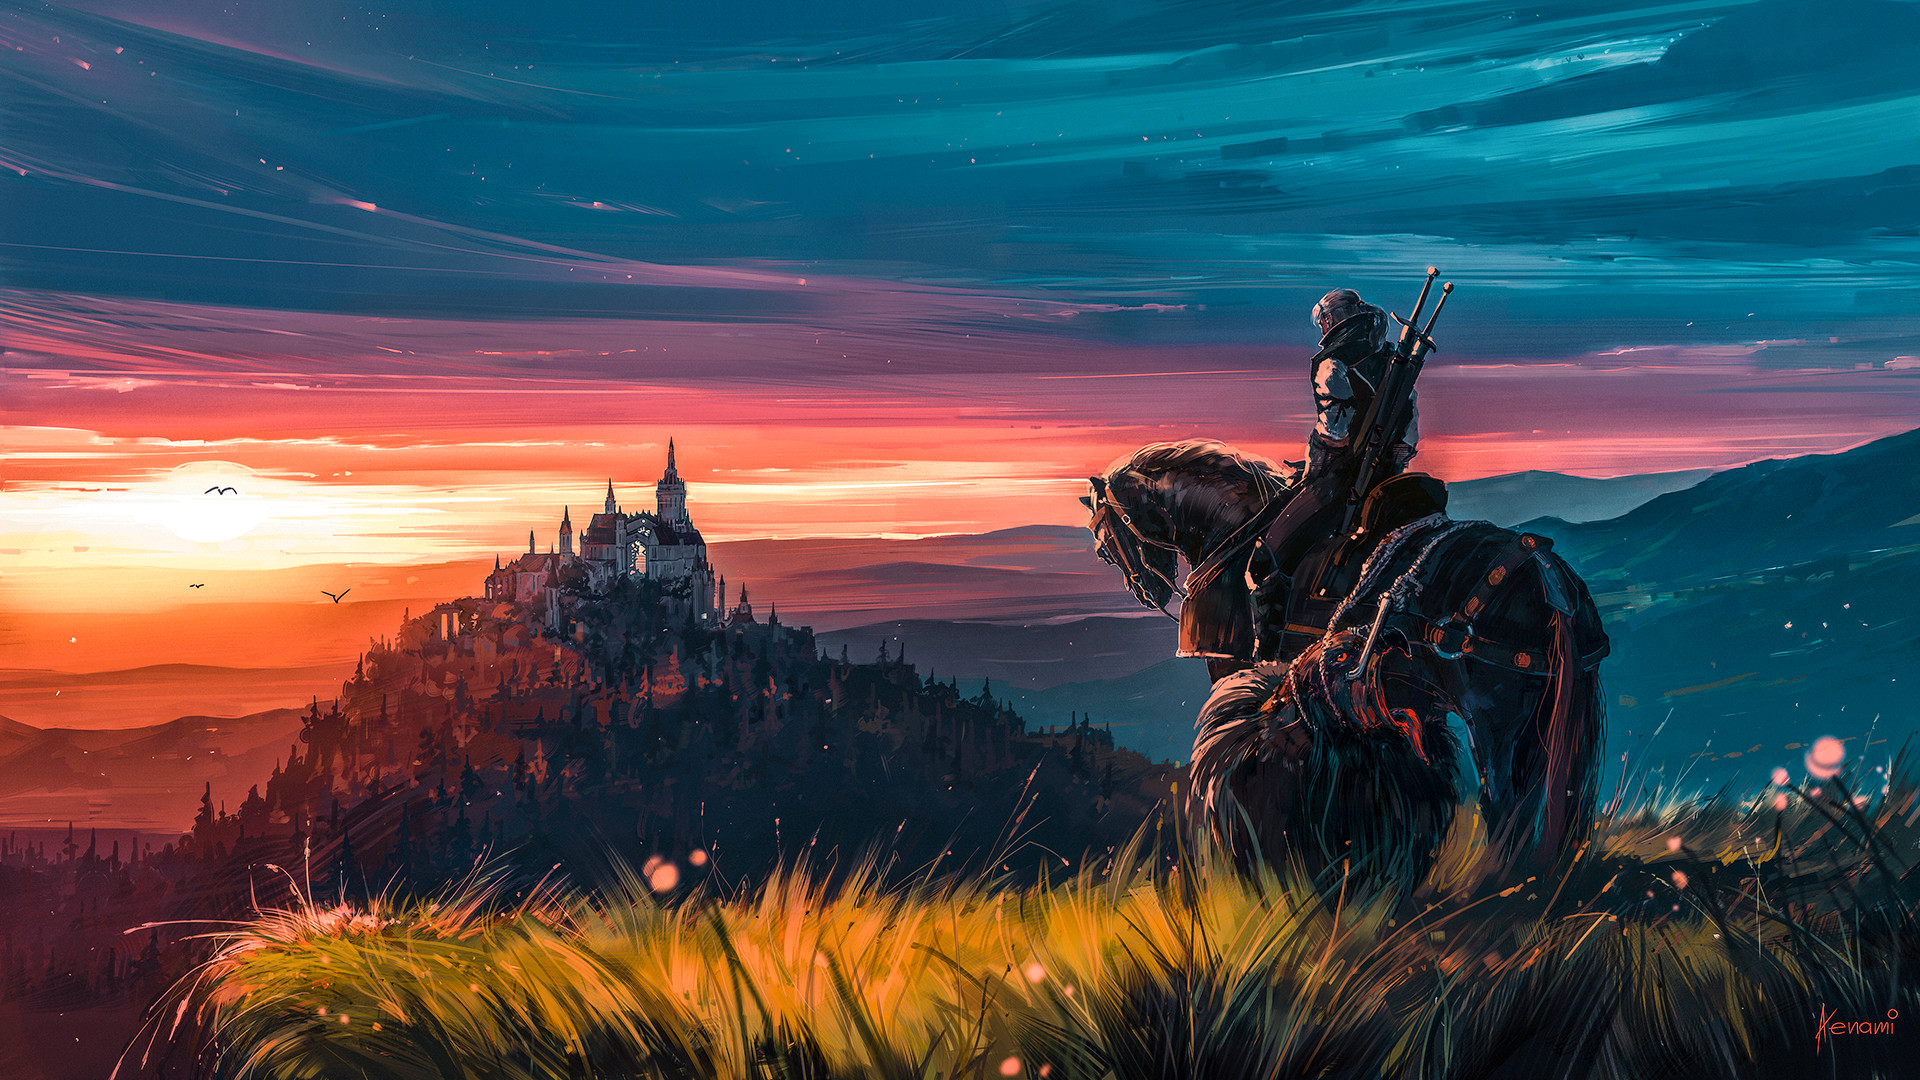 Warrior Horse Painting Sky Aenami Video Games The Witcher Geralt Of Rivia The Witcher 3 Wild Hunt Bl 1920x1080